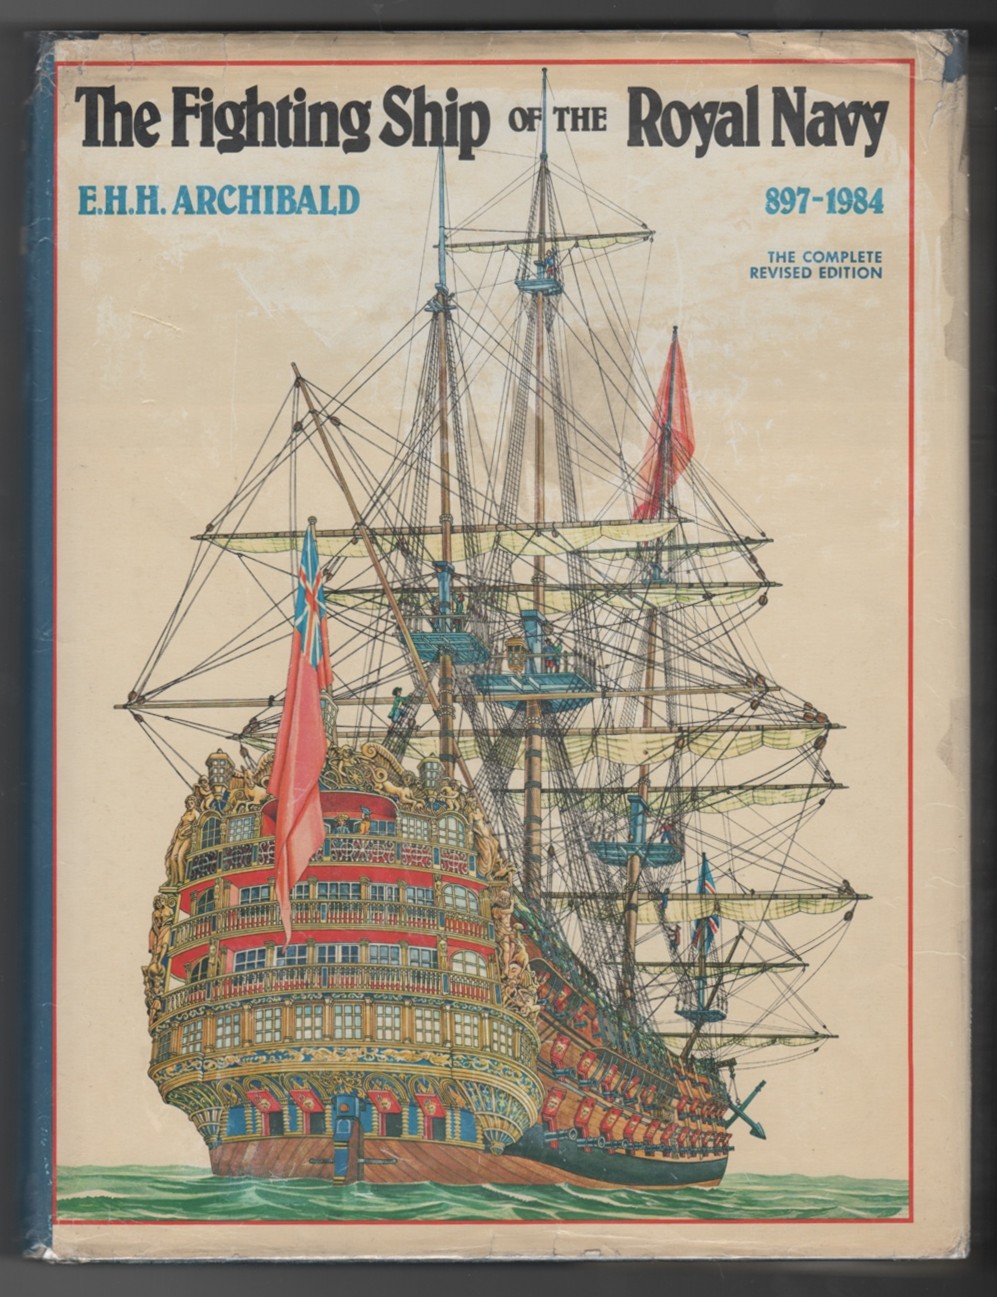 ARCHIBALD, E.H.H. & RAY WOODWARD - *the Fighting Ship of the Royal Navy, 897